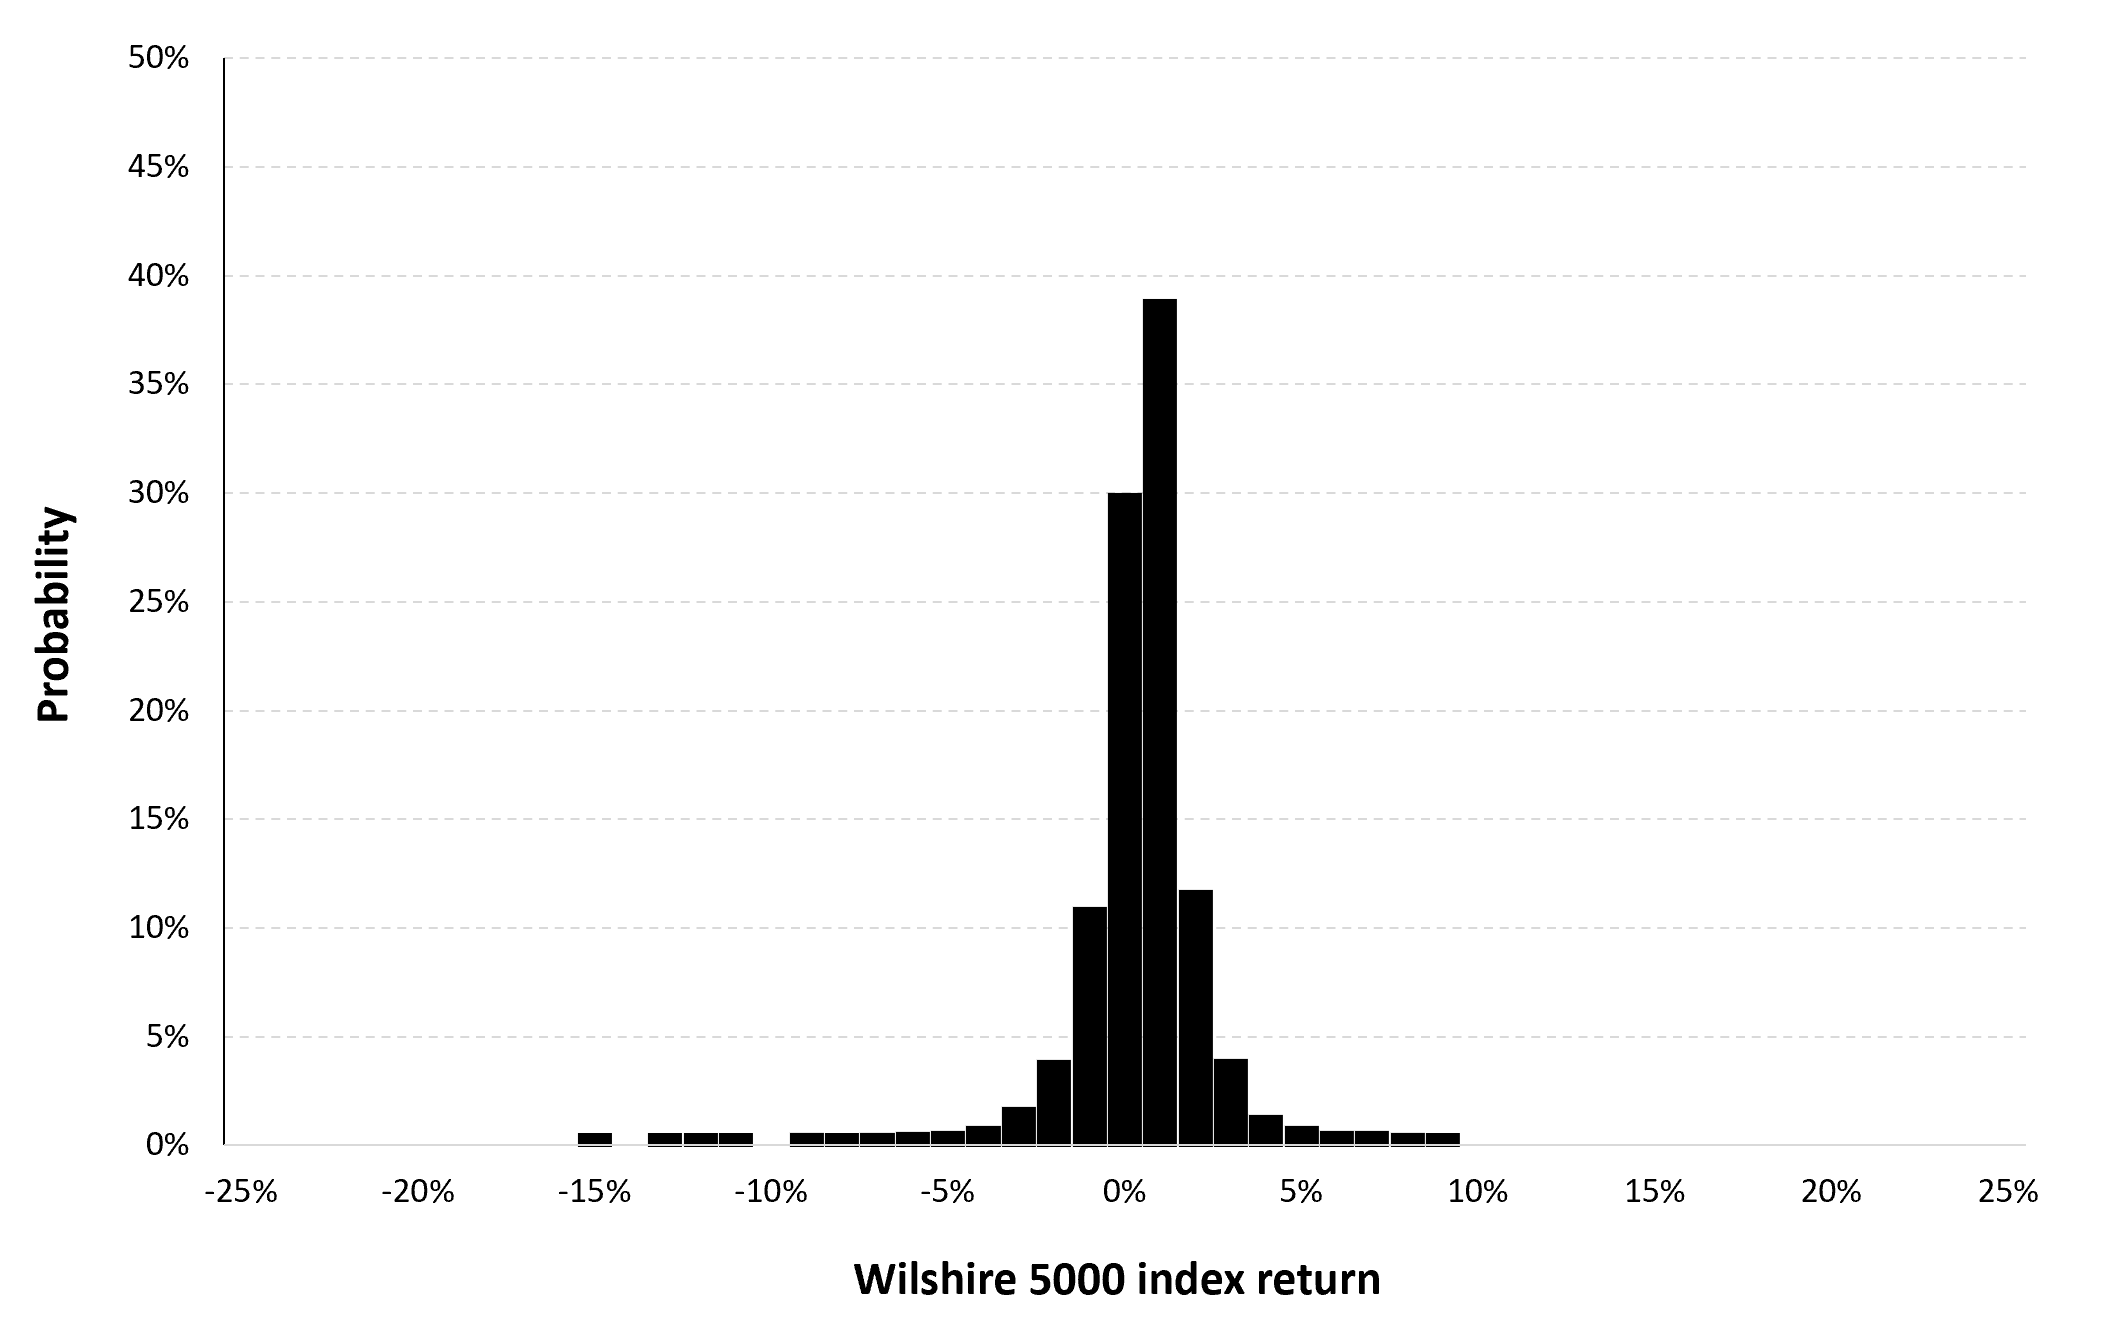 Historical distribution of the daily Wilshire 5000 index returns